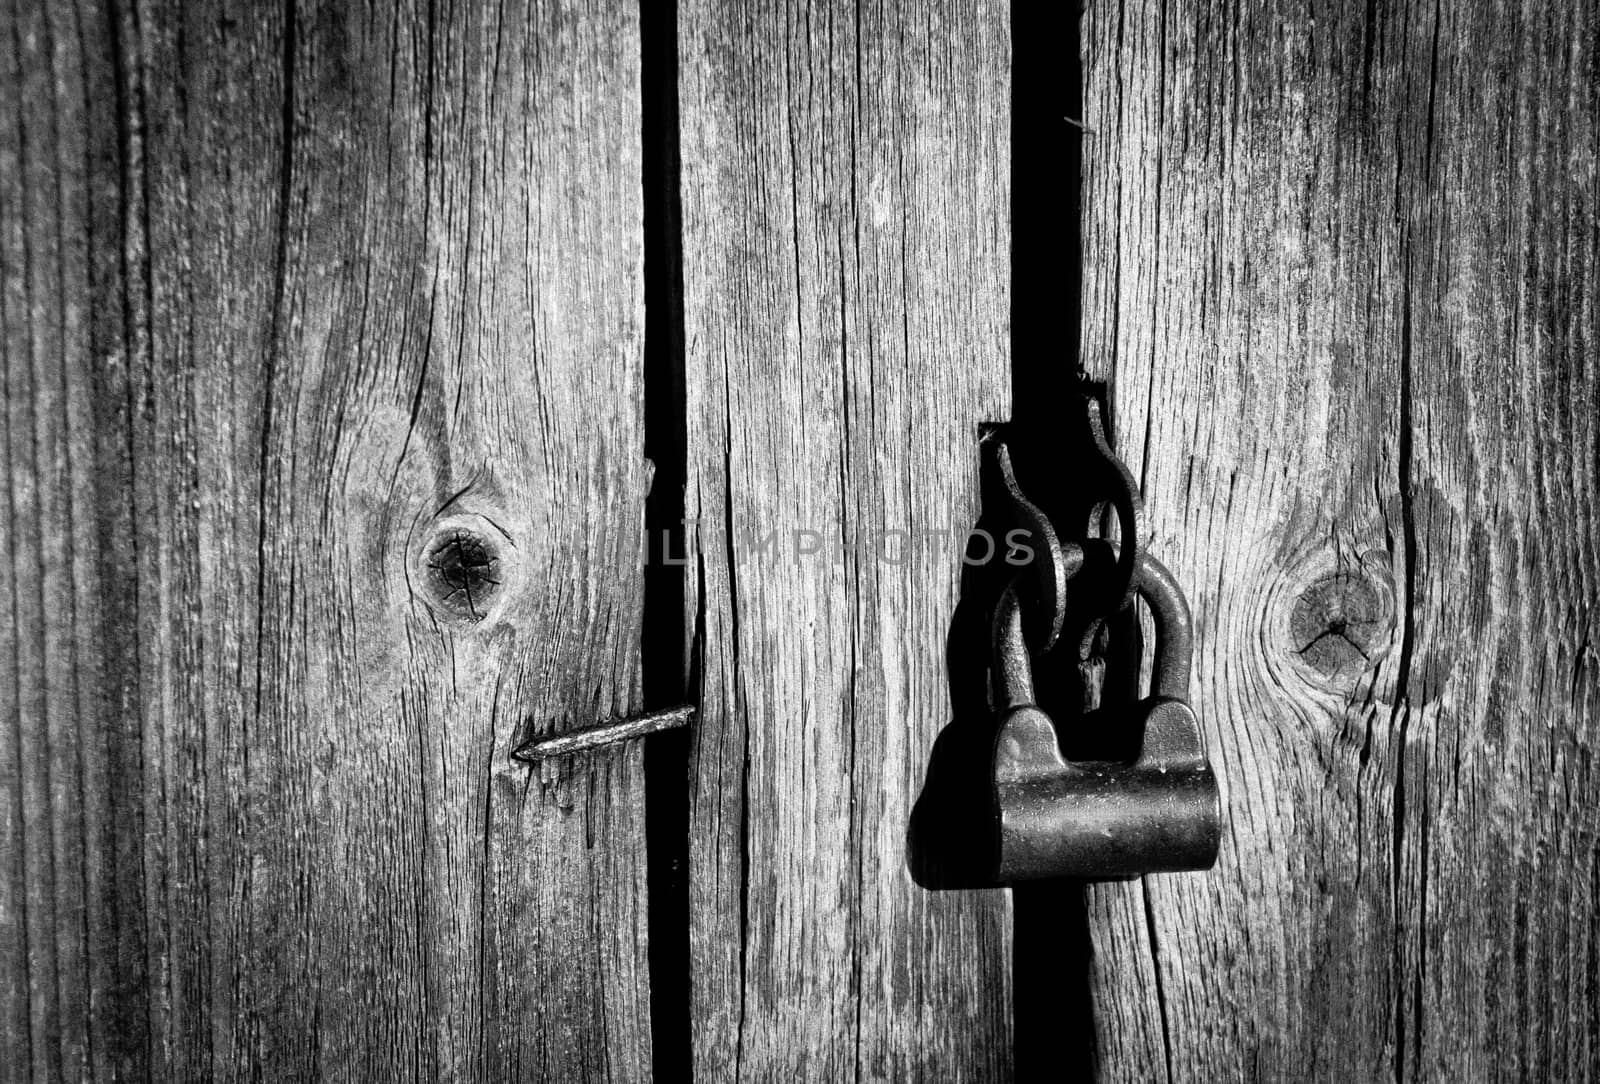 A black and white image with an old lock locked in a wooden door